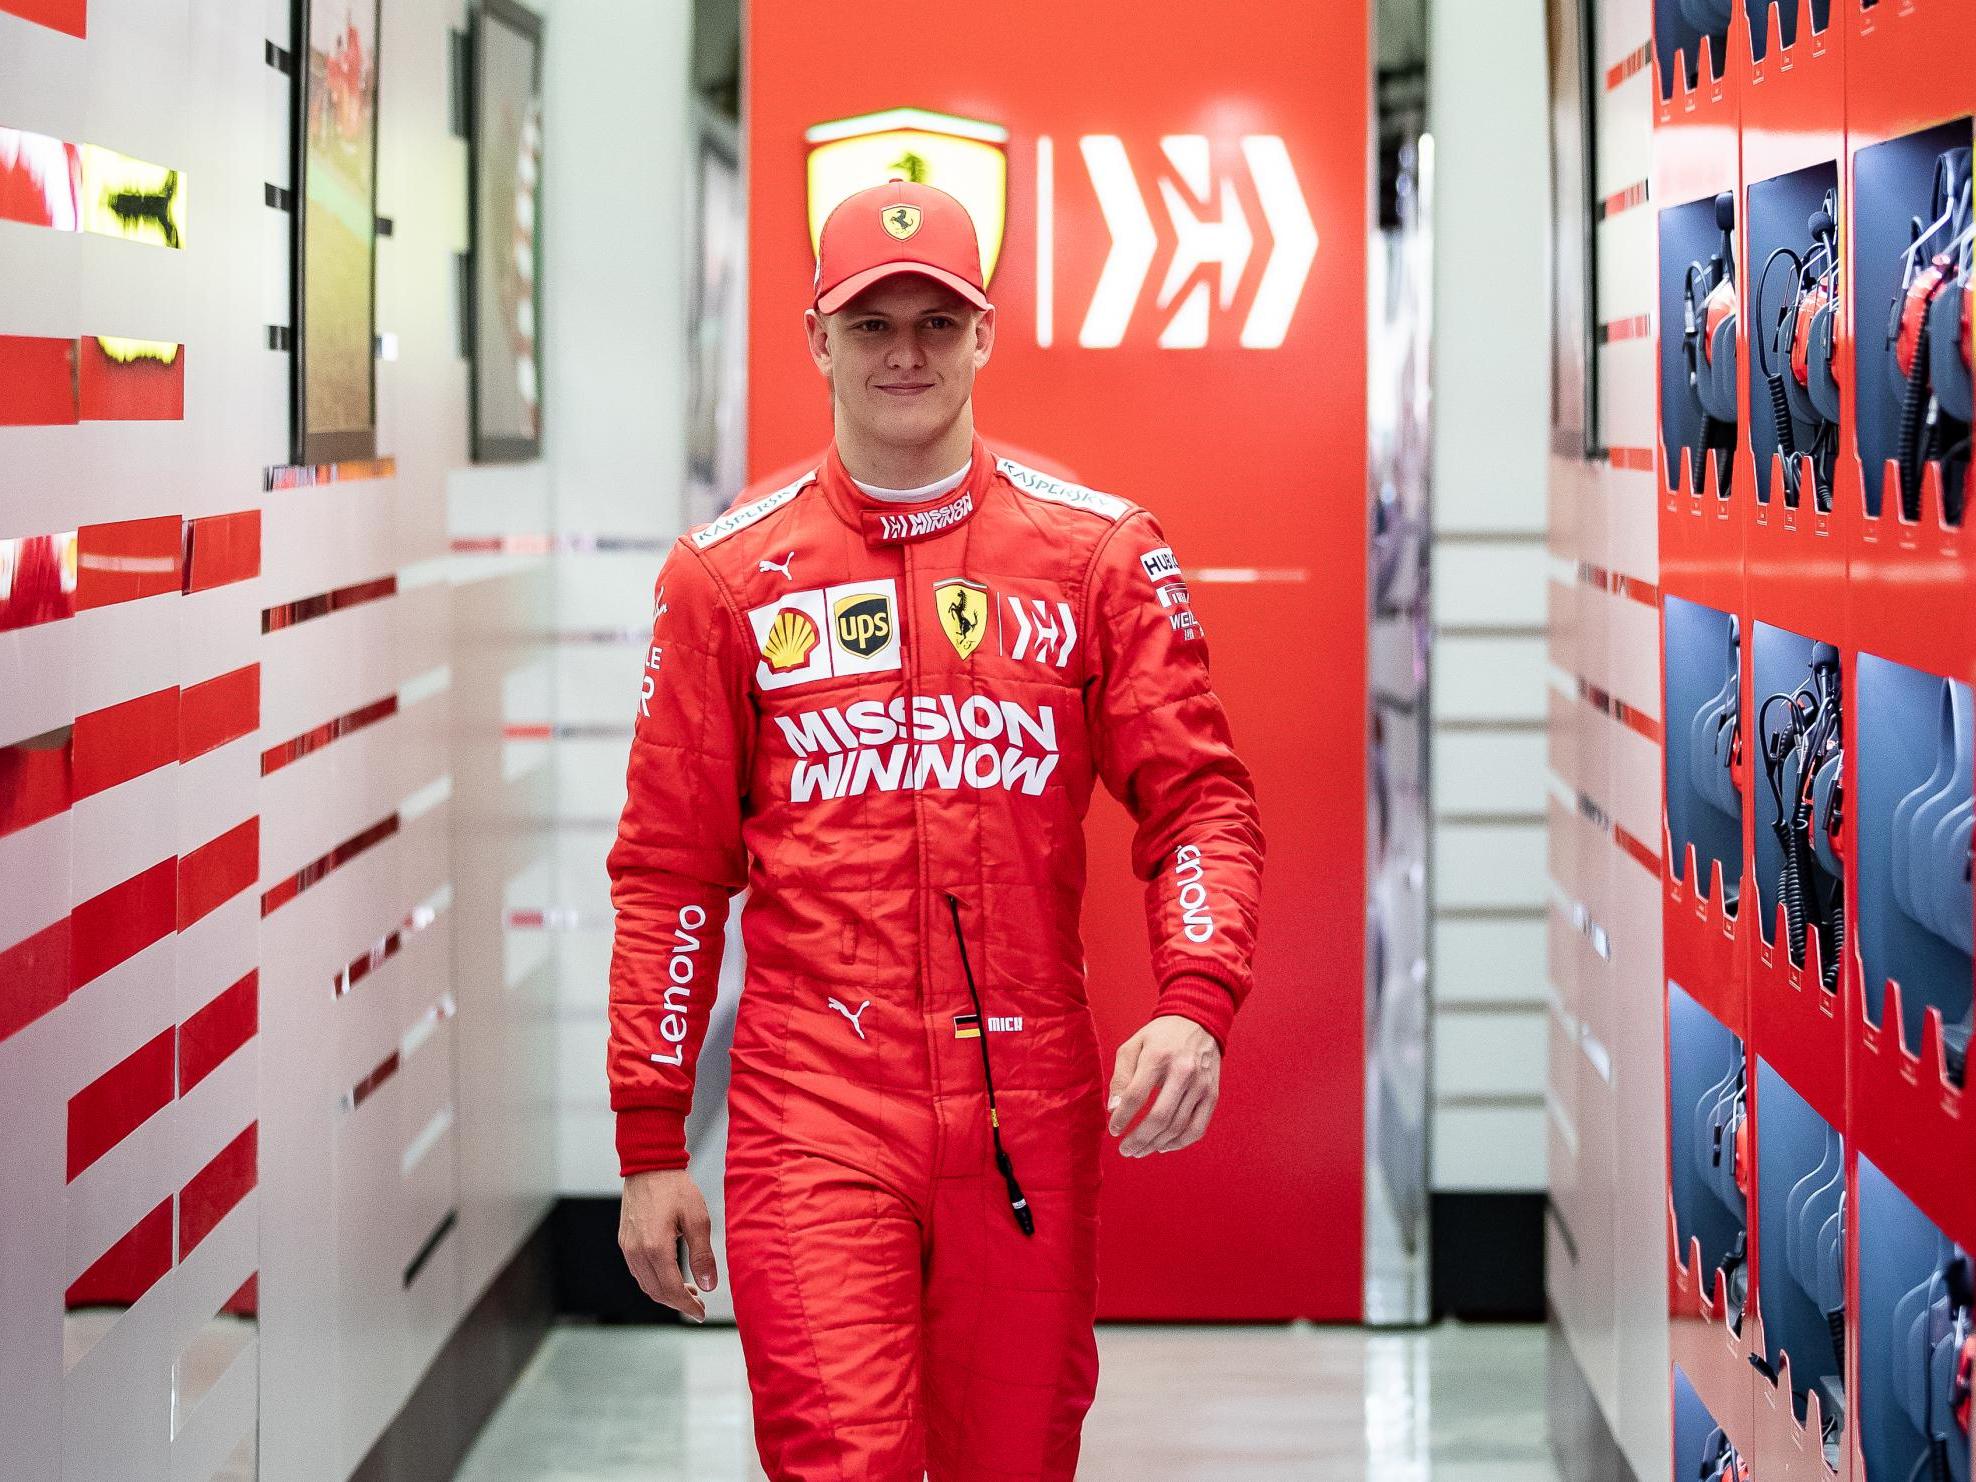 Mick Schumacher is following his father Michael’s racing career